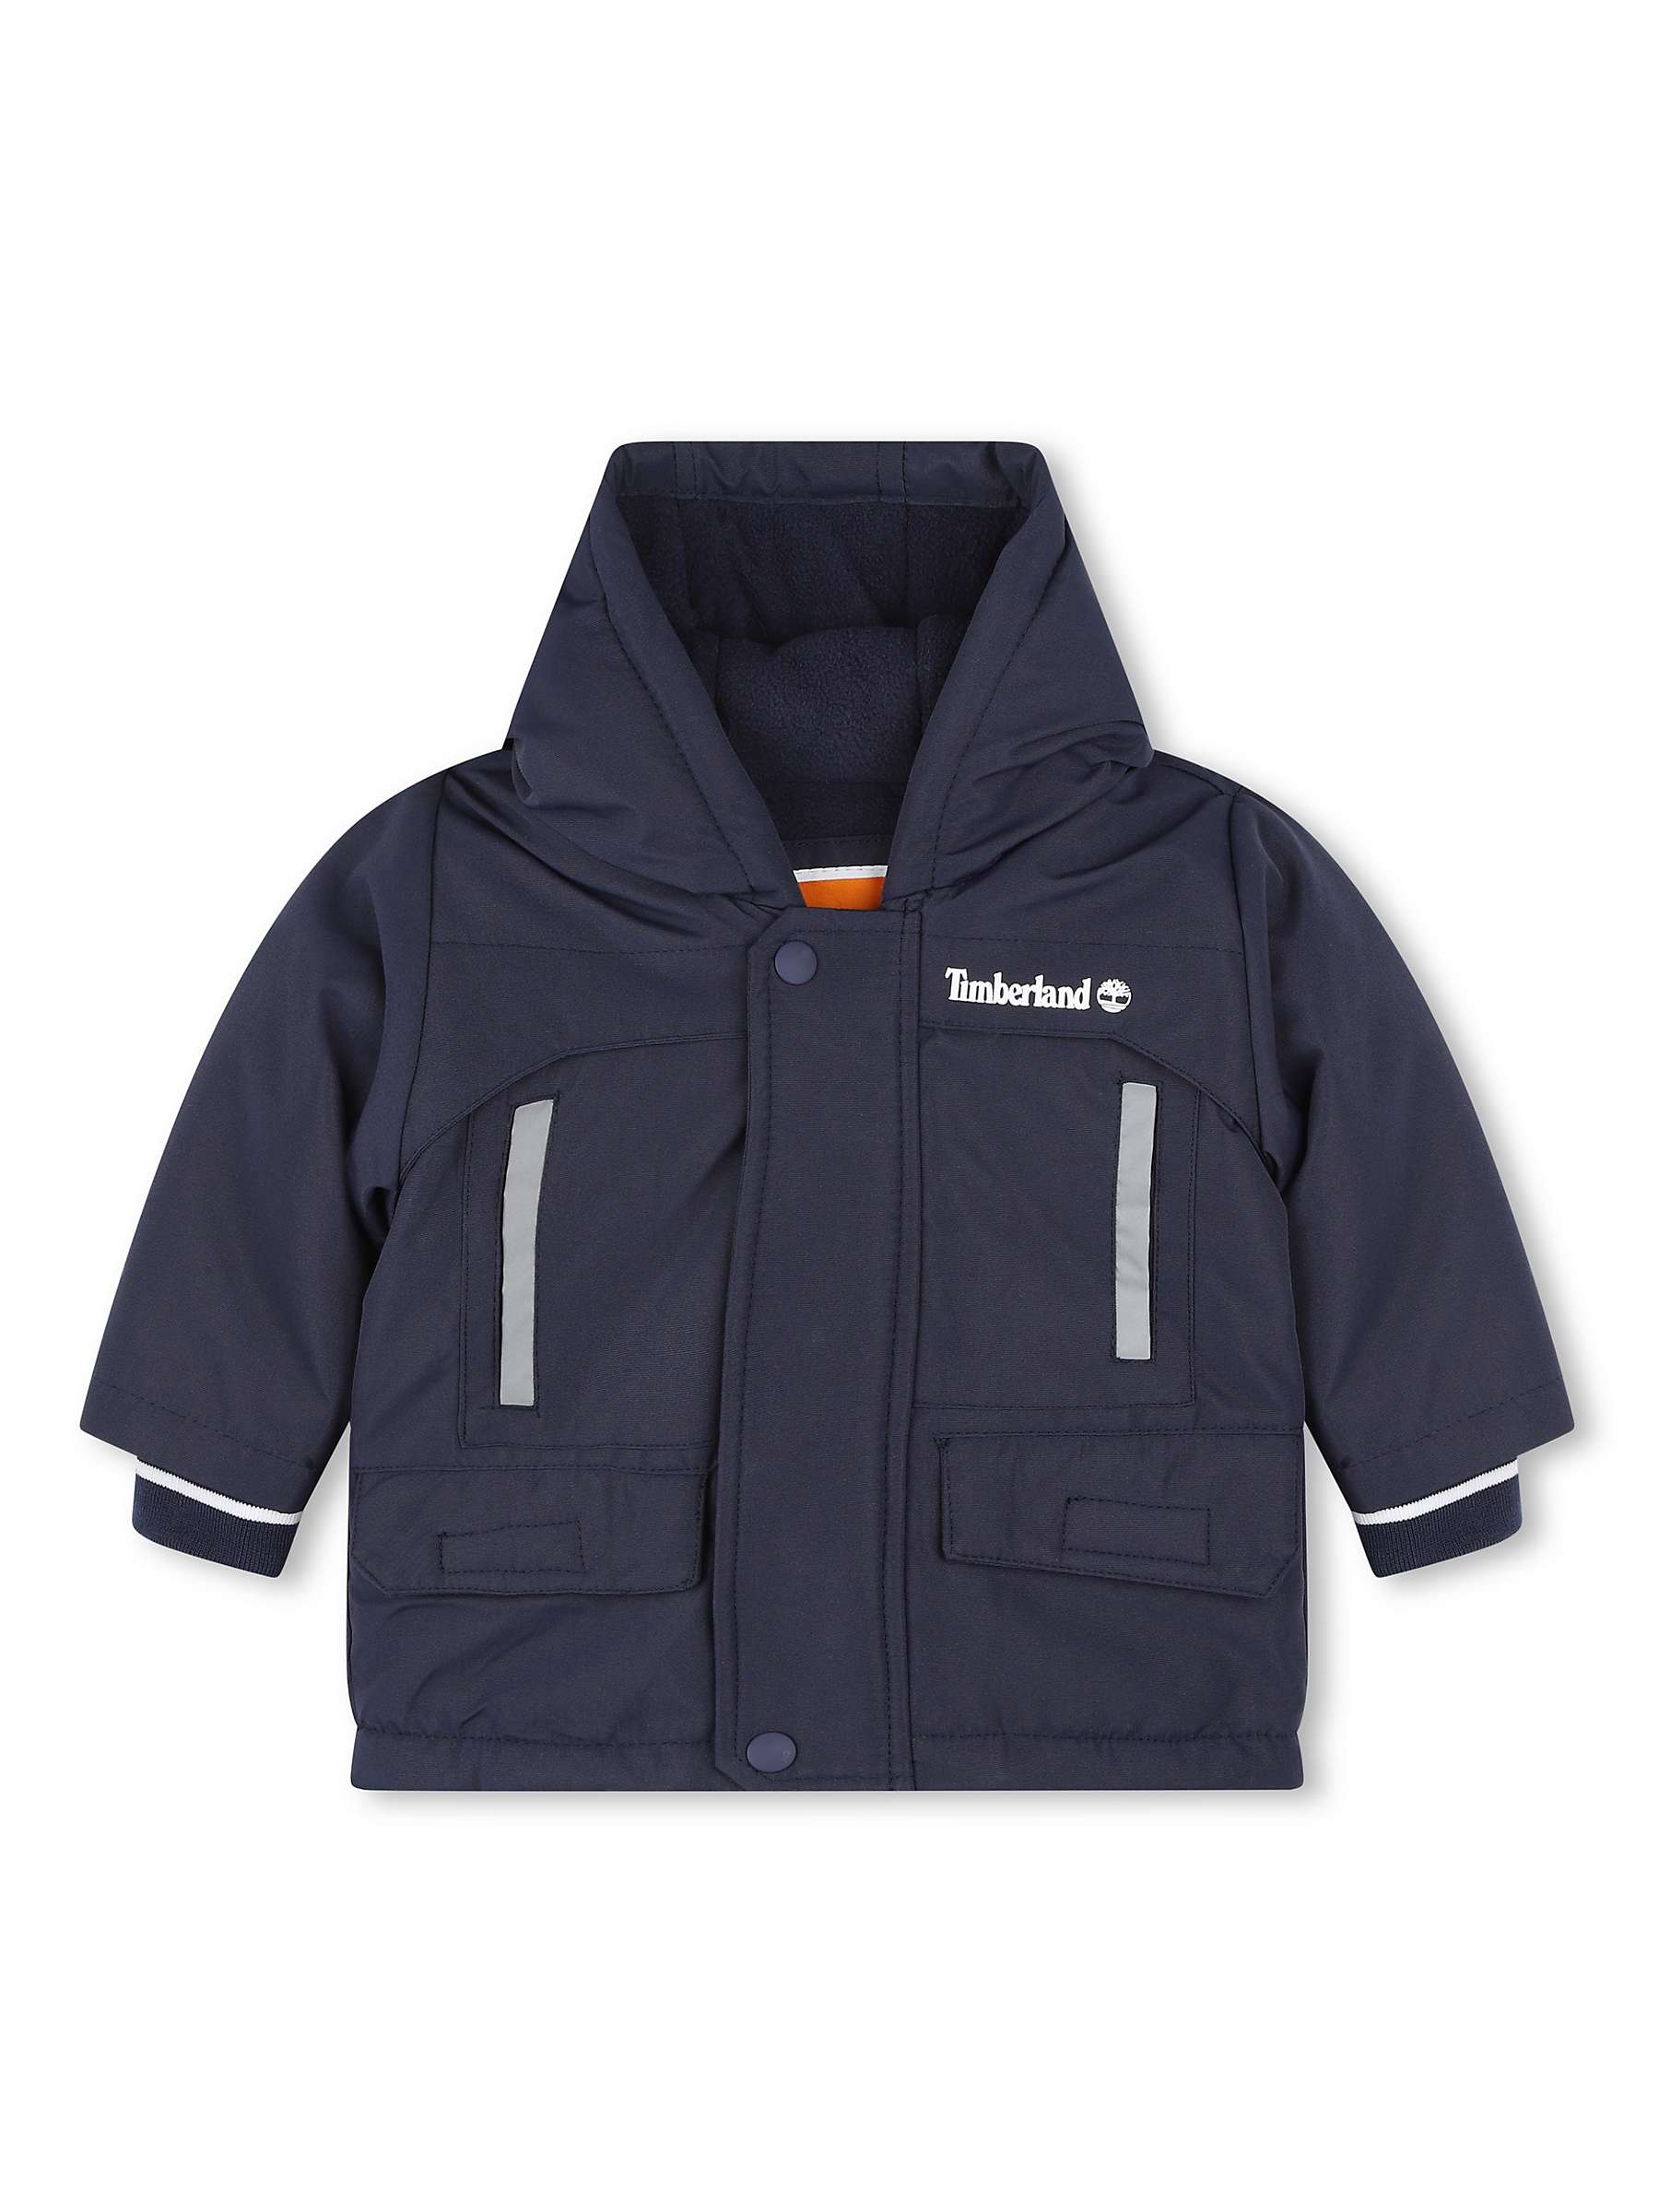 Buy Timberland Baby Fleece Lined Parka, Navy Online at johnlewis.com